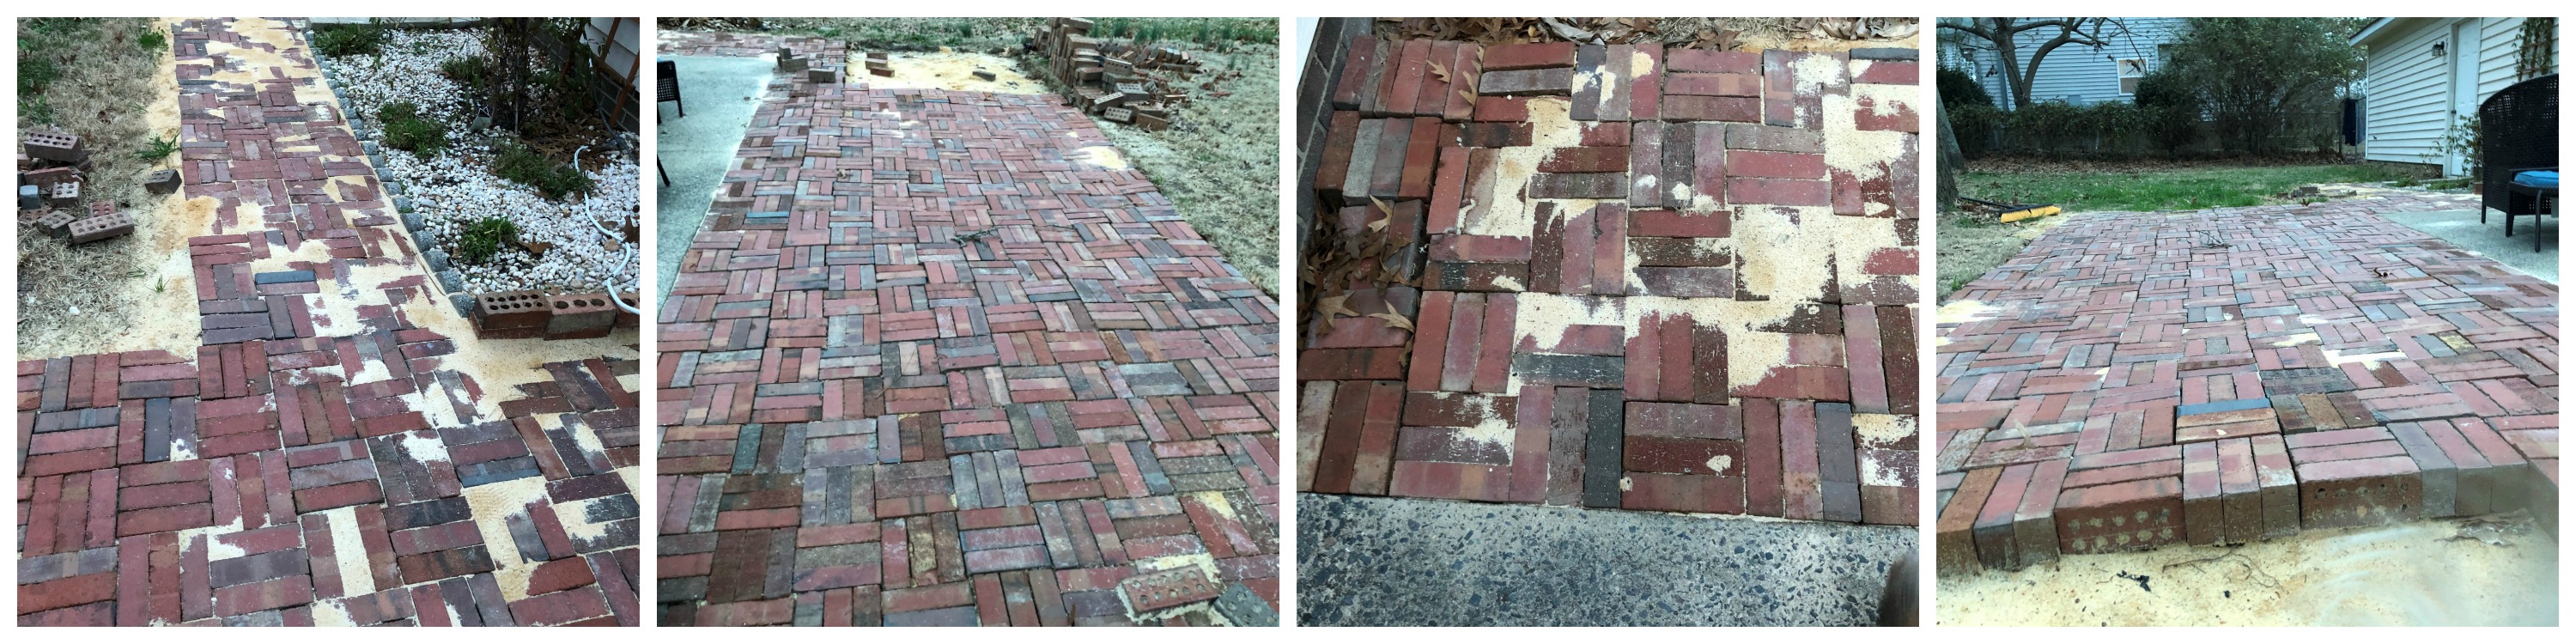 collage of patio showing current status